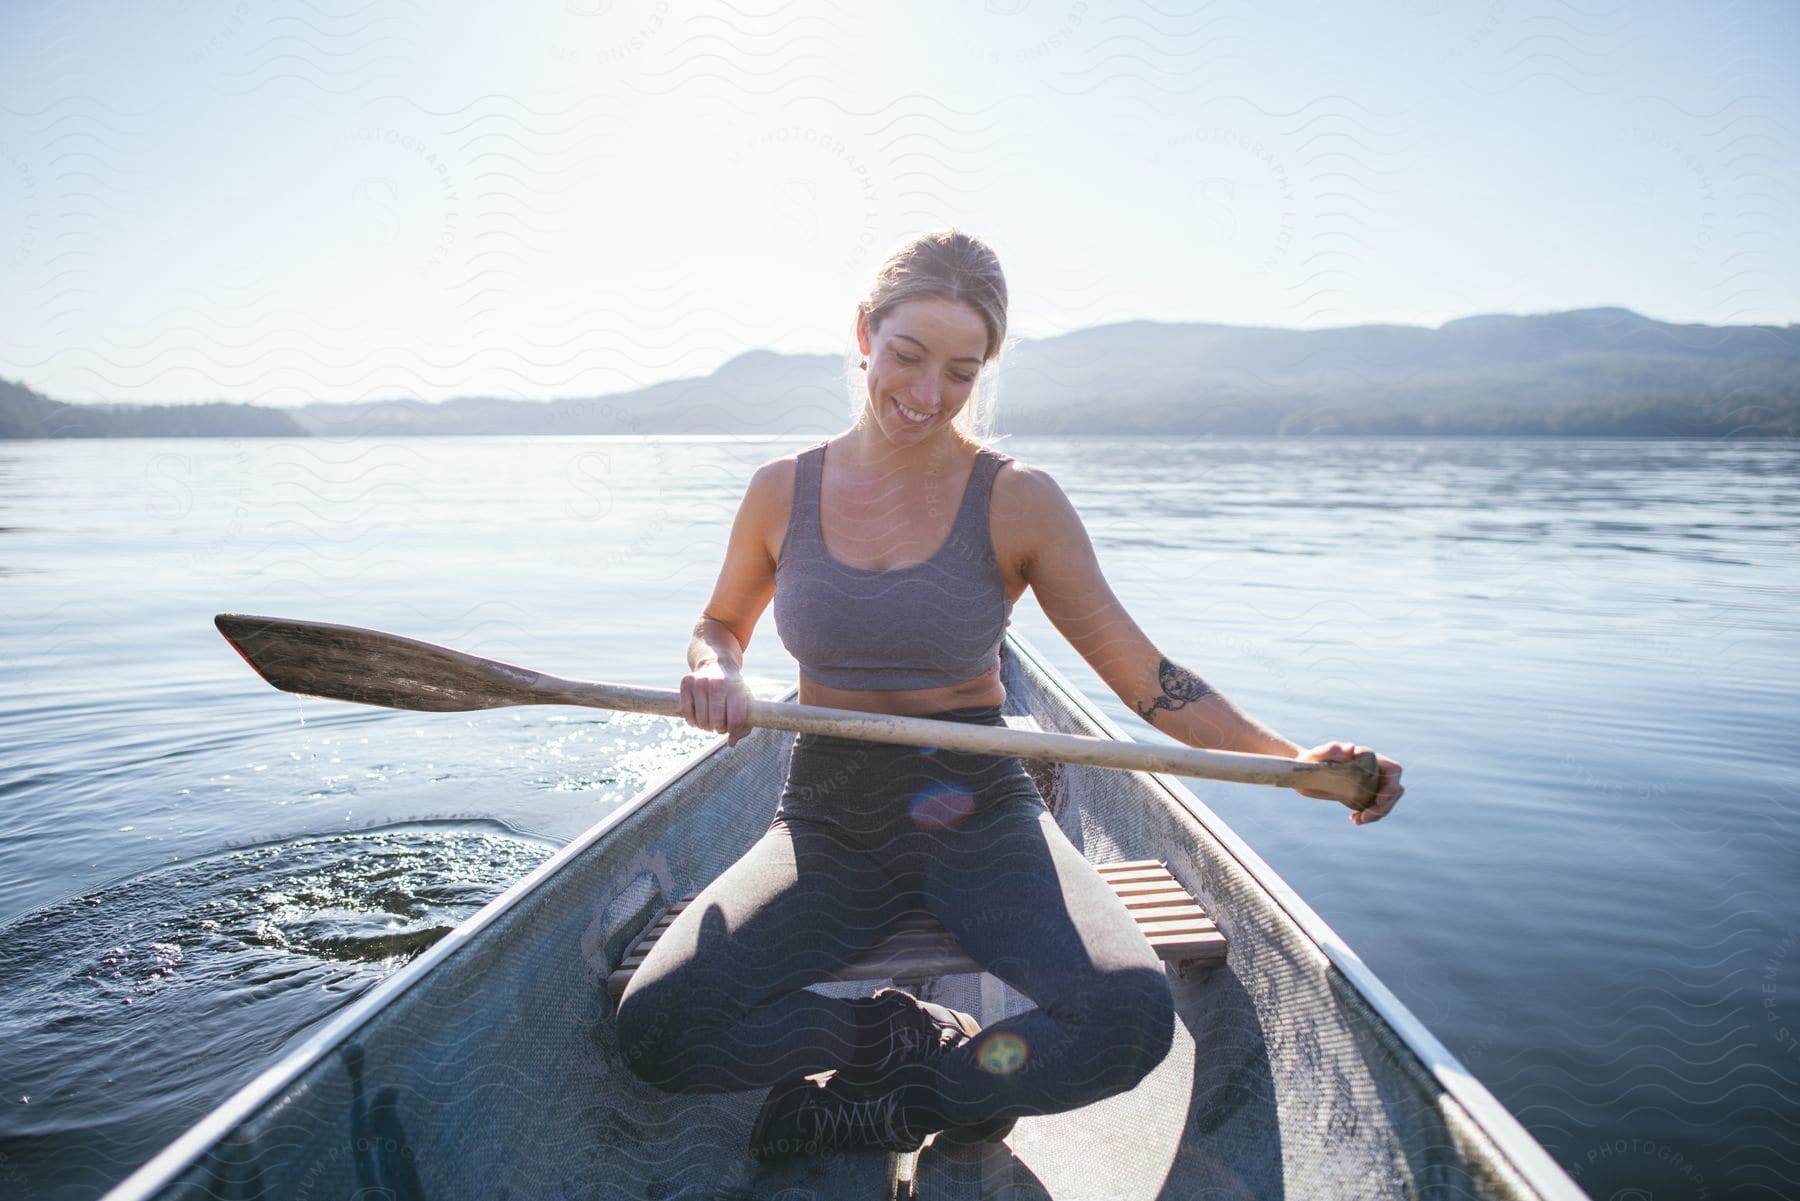 A woman rows a boat in a lake near mountains on a sunny day